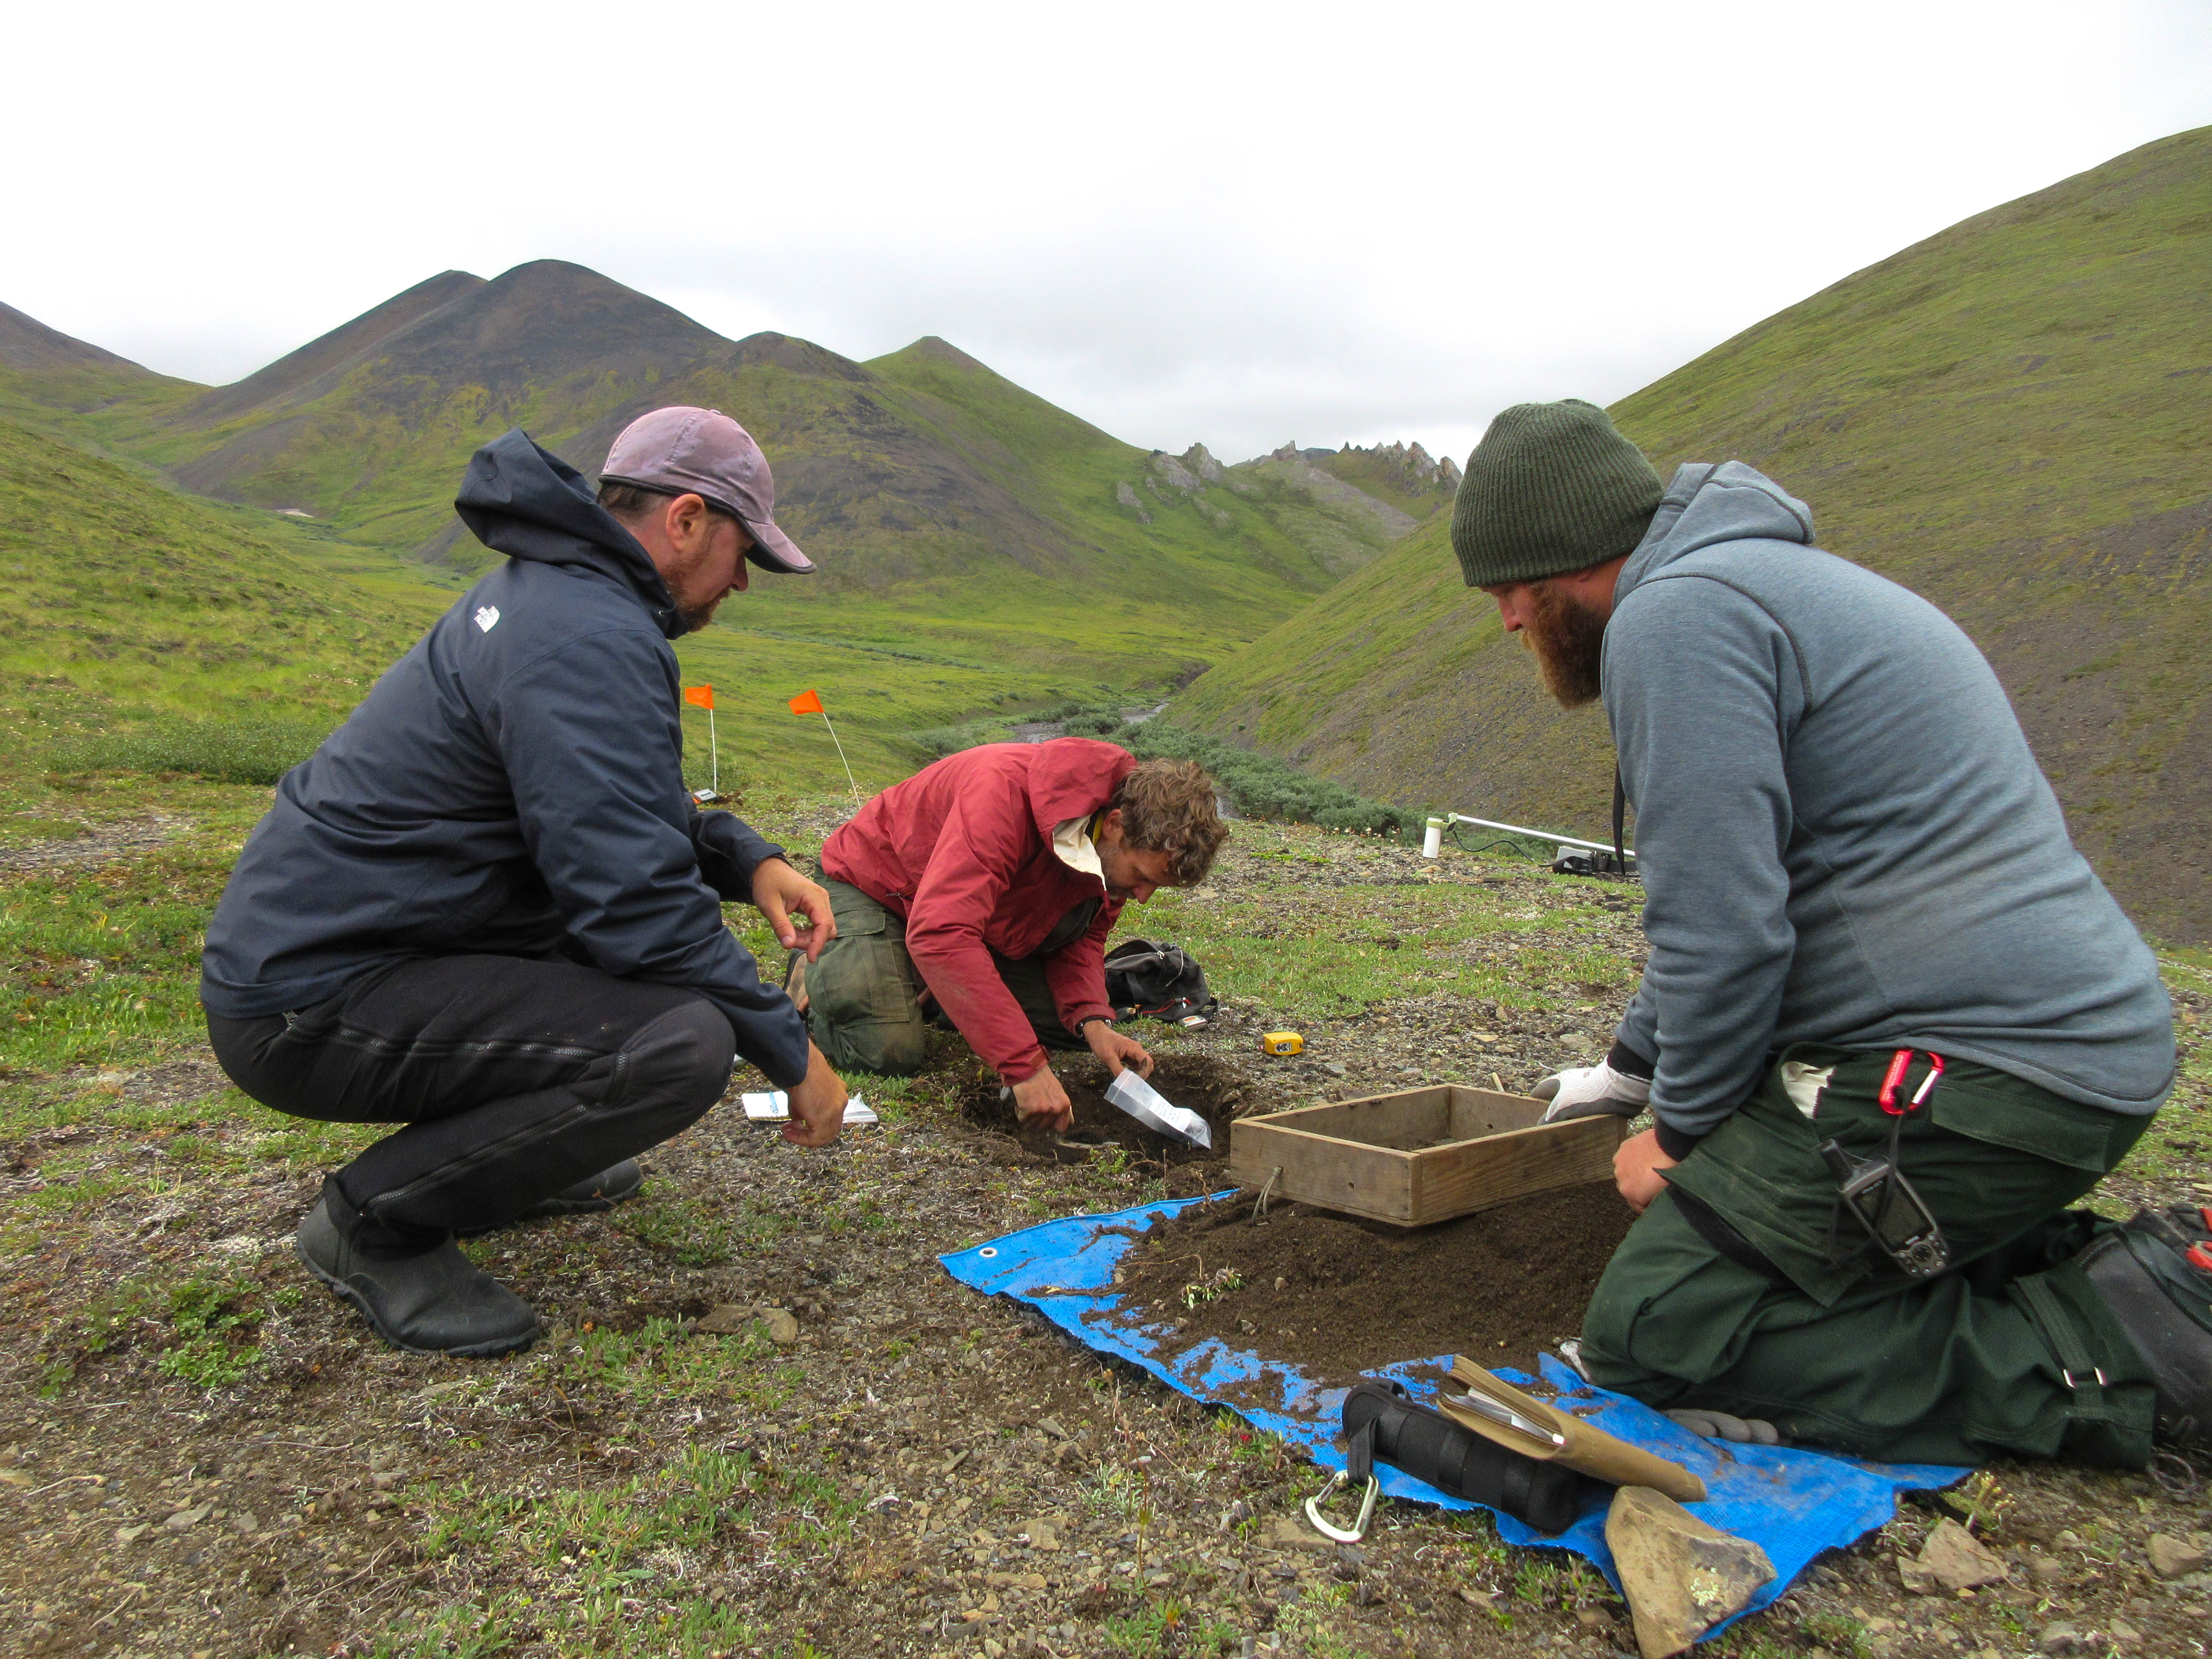 Three men use shovels to dig up soil to take samples of the soil